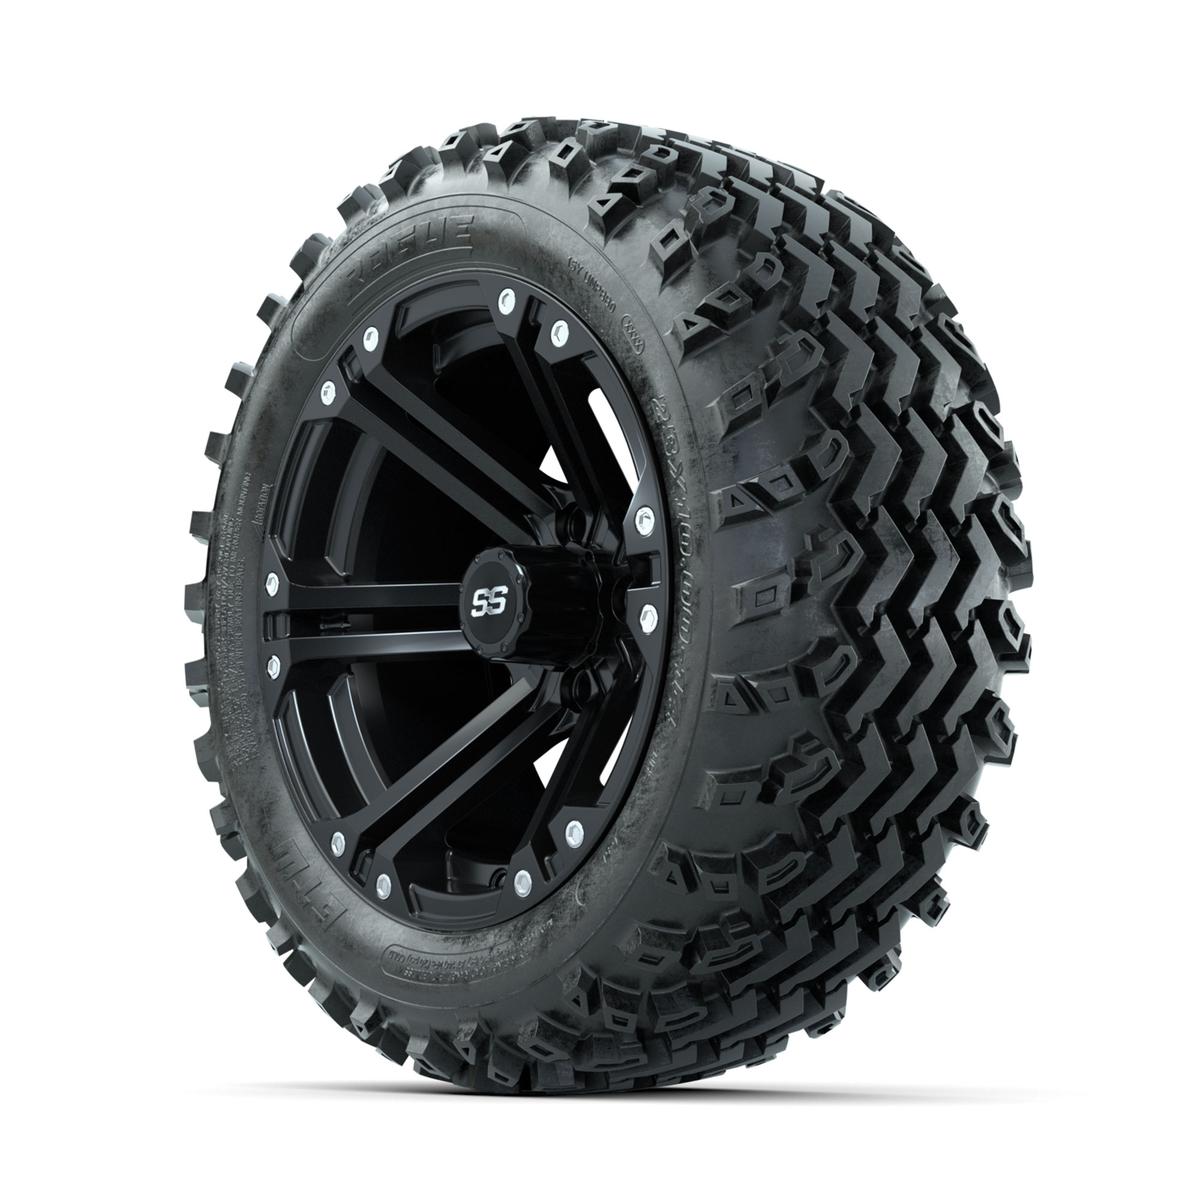 GTW Specter Matte Black 14 in Wheels with 23x10.00-14 Rogue All Terrain Tires – Full Set